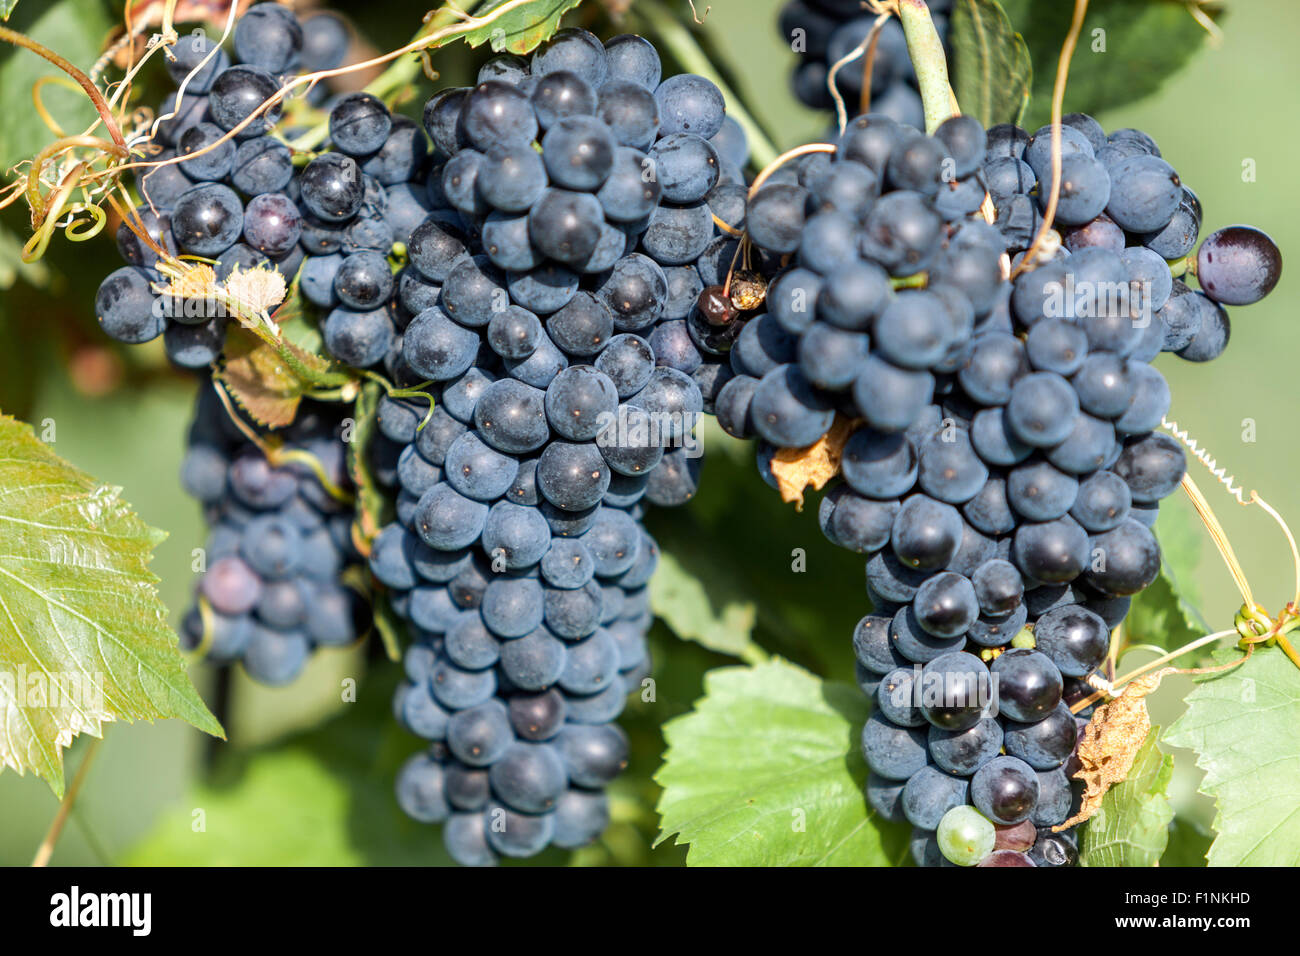 Wine region Valtice, a bunch of grapes on vine, South Moravia, Czech Republic, Europe Stock Photo